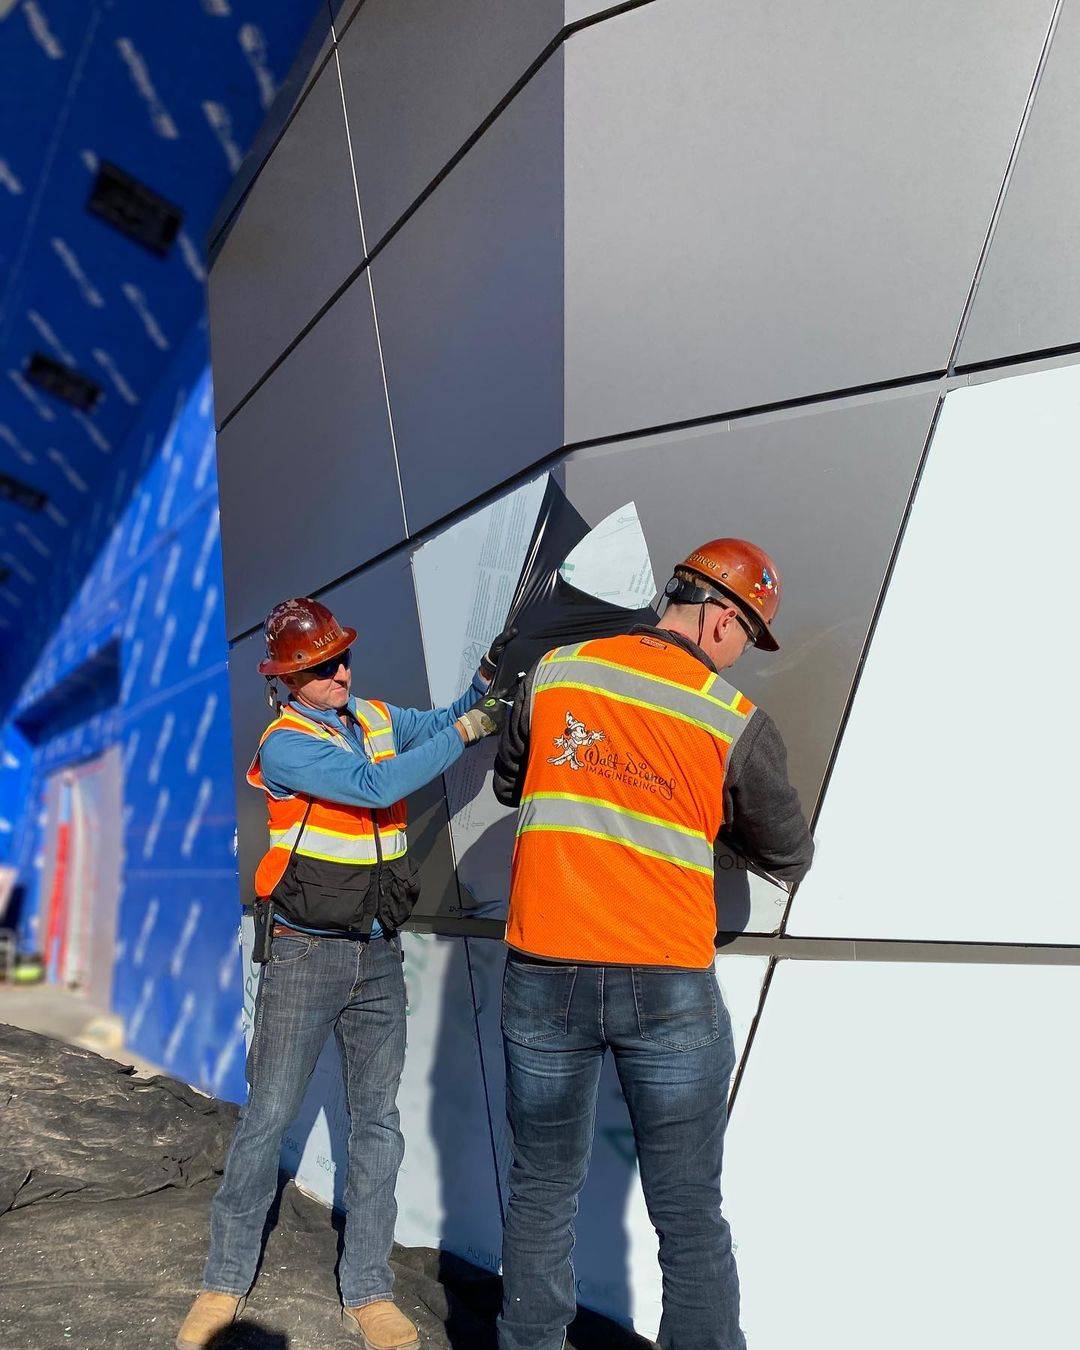 Disney Imagineer shares first look at the exterior metal panels that will form the entrance to Guardians of the Galaxy Cosmic Rewind at EPCOT